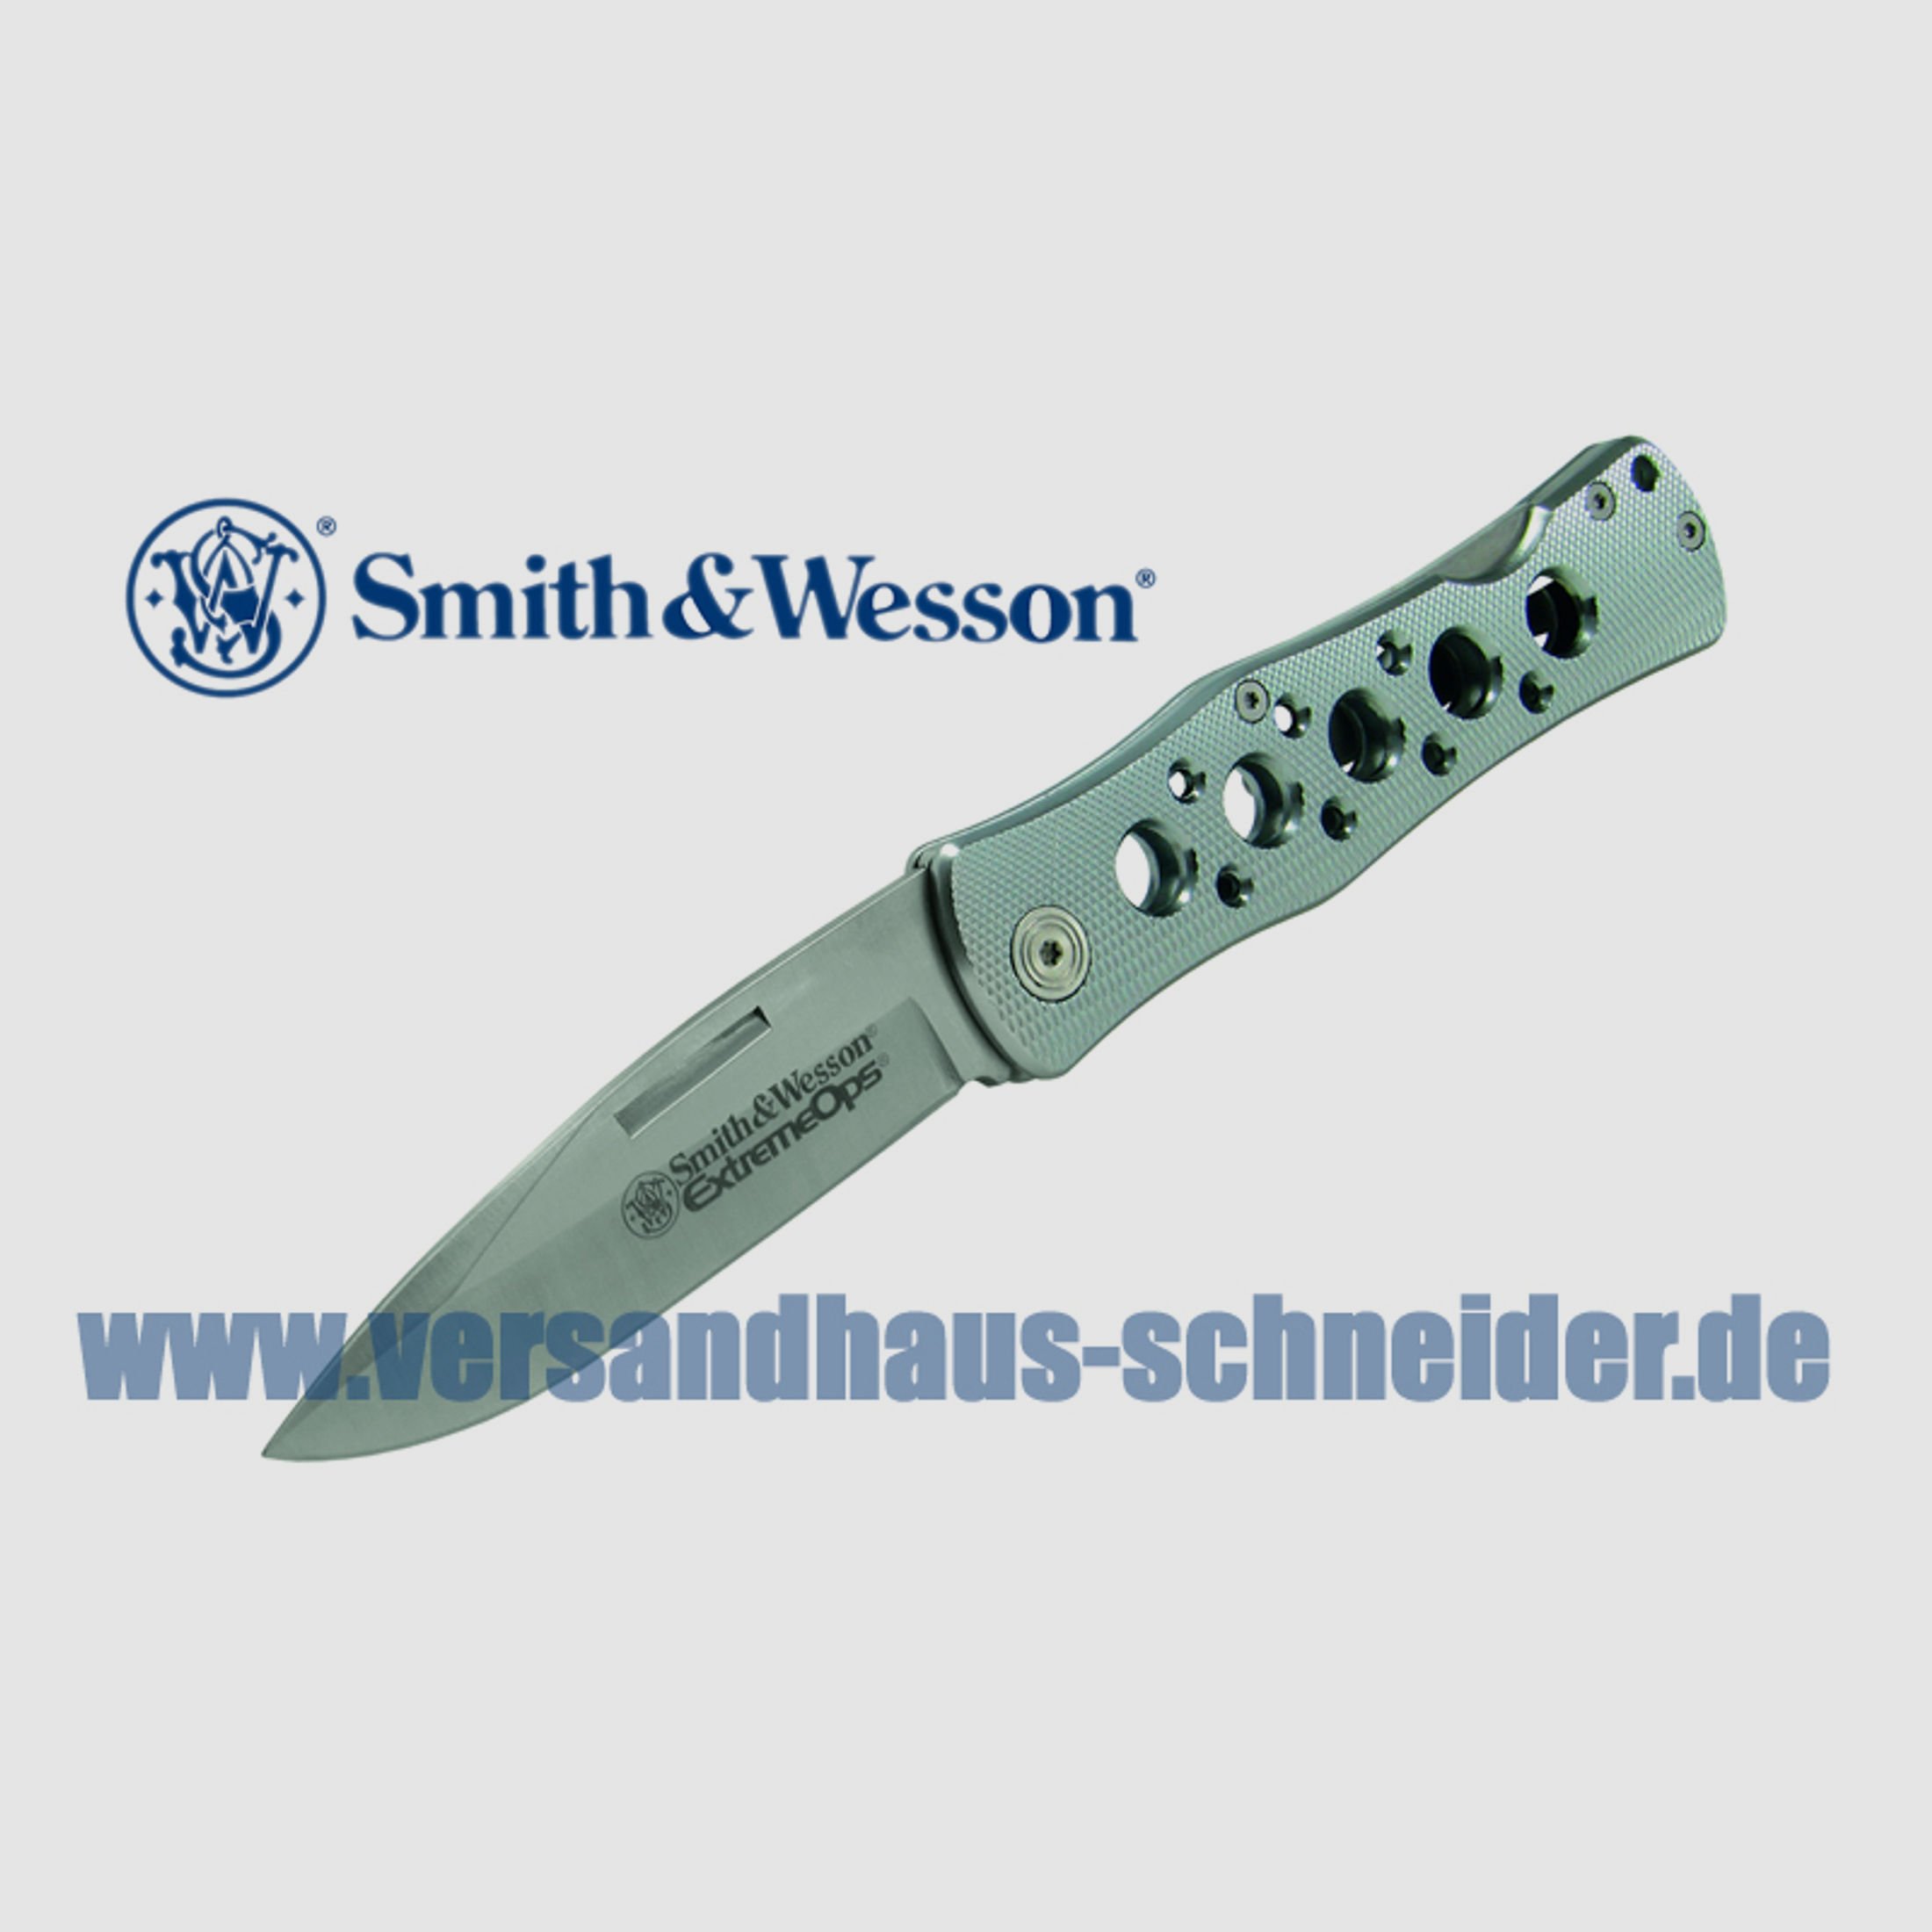 Smith and Wesson Taschenmesser ExtremeOps Stahl AISI 420, Aluminium-Griffe, Clip